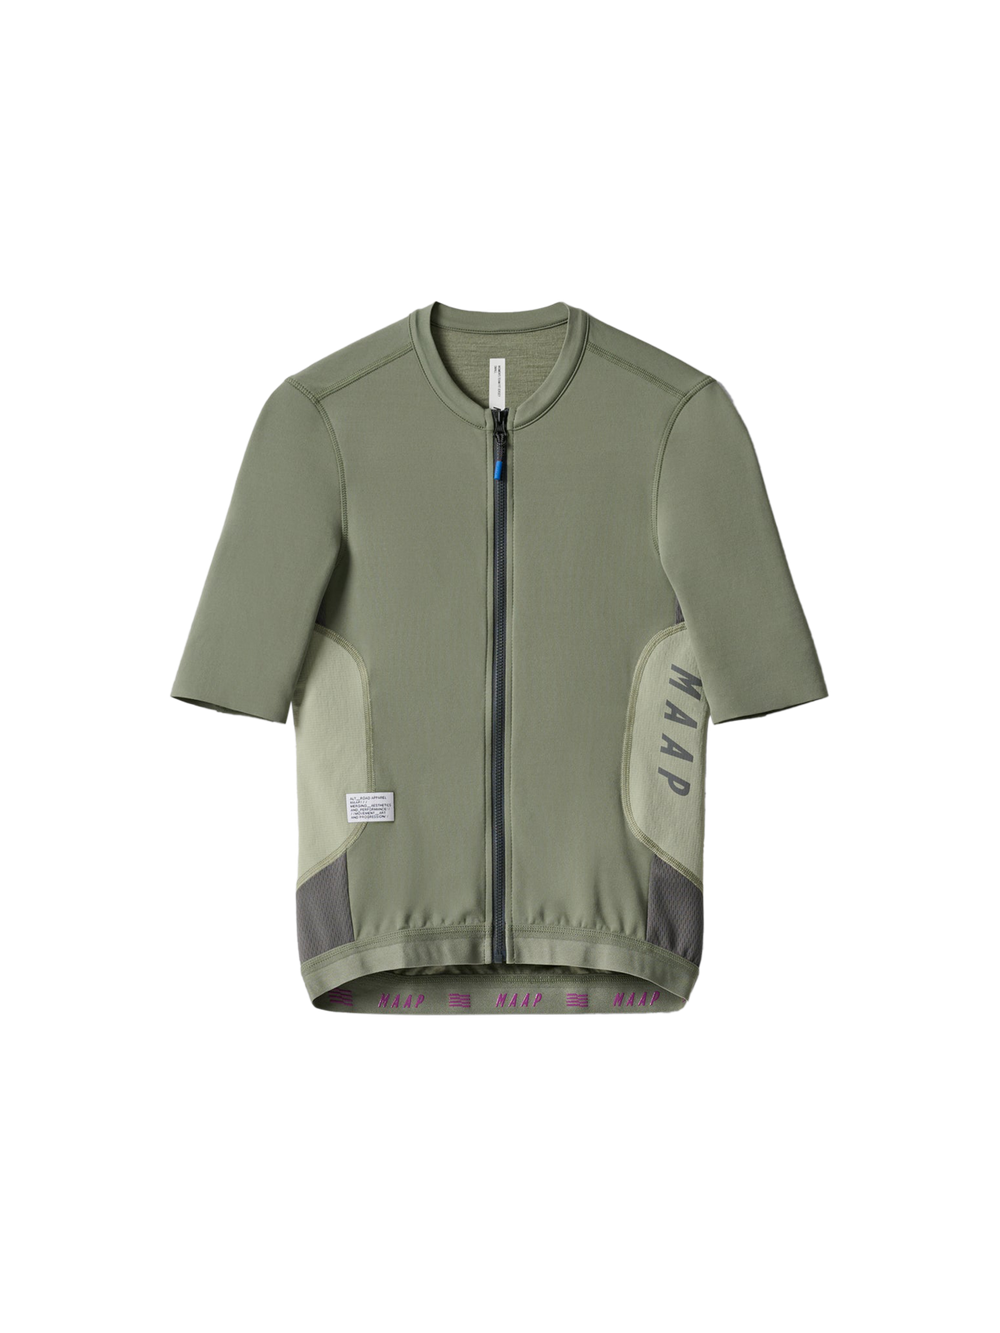 Product Image for Alt_Road Jersey